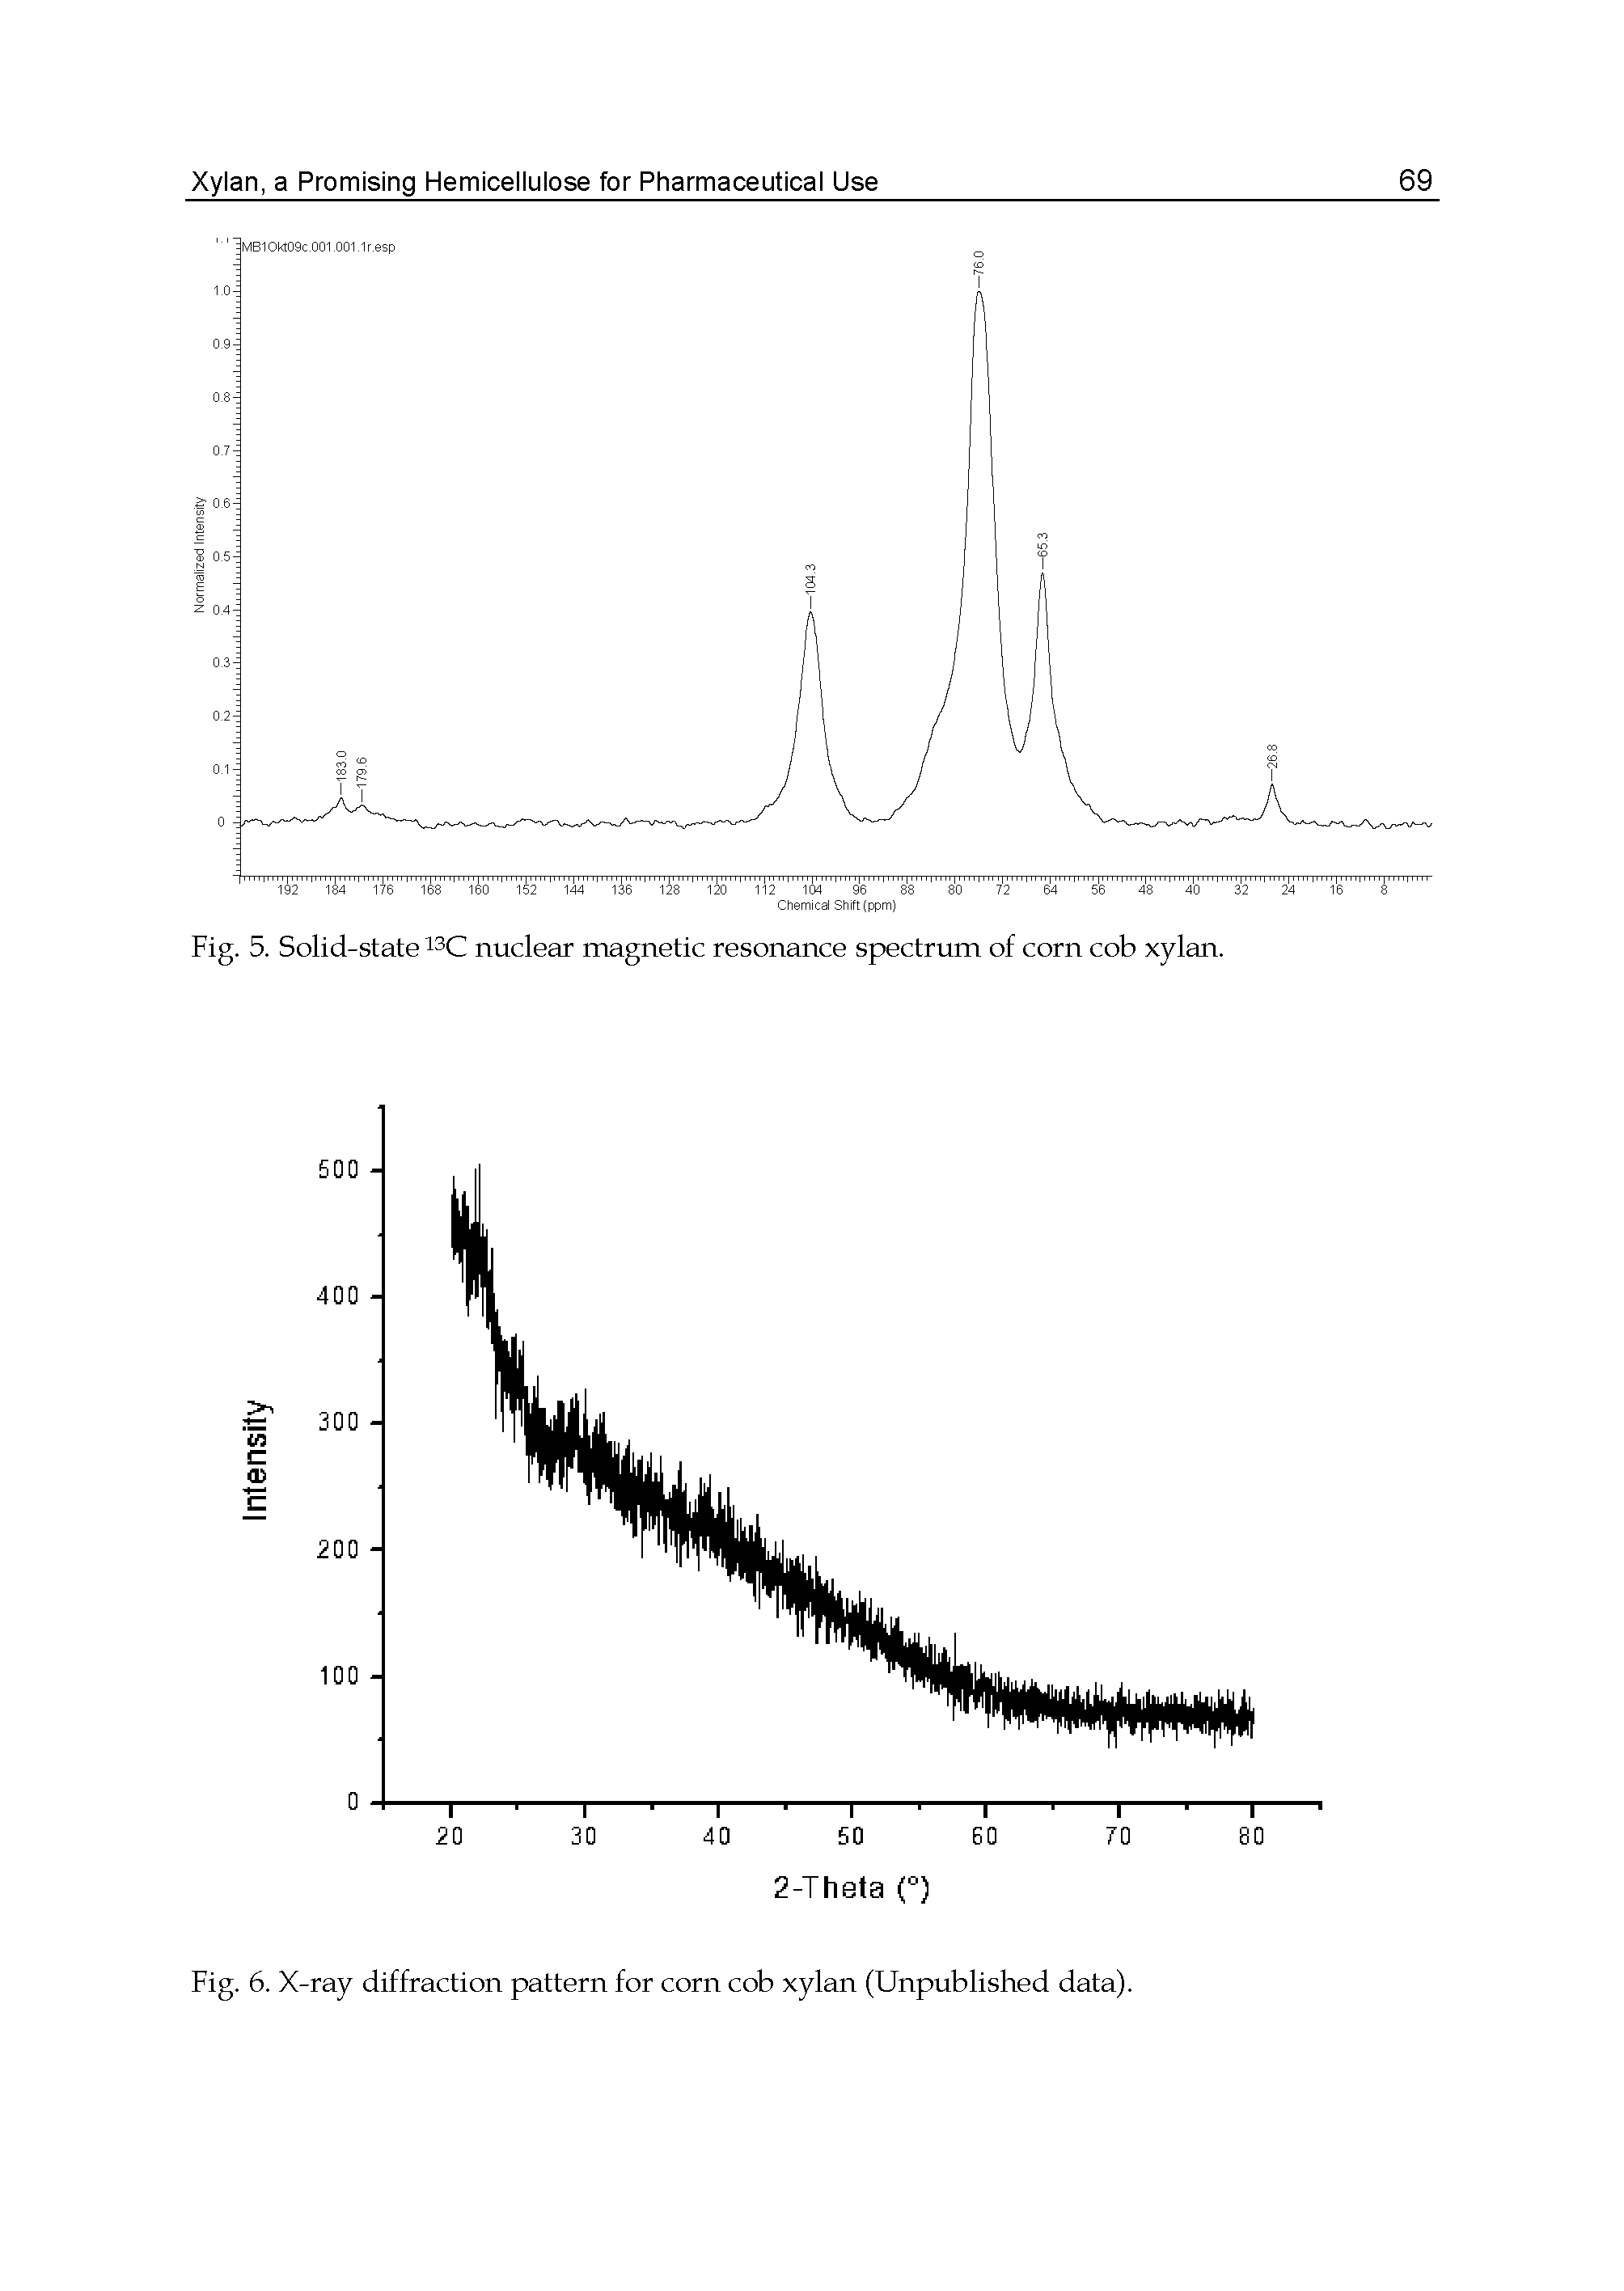 Fig. 6. X-ray diffraction pattern for corn cob xylan (Unpublished data).